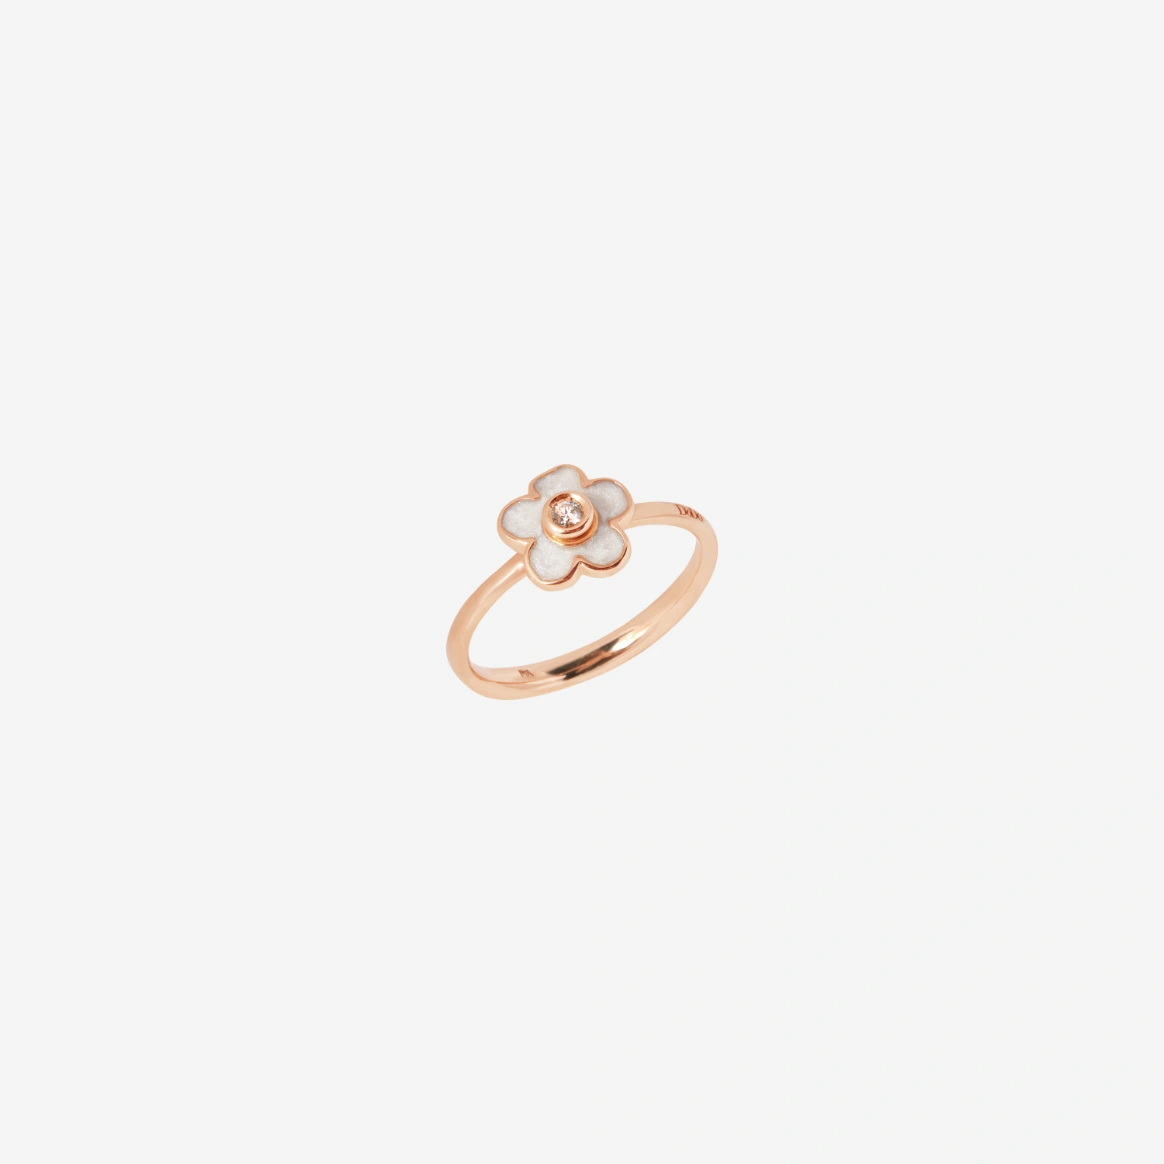 Dodo Flower Ring in 9k Rose Gold with Mother of Pearl Enamel - Orsini Jewellers